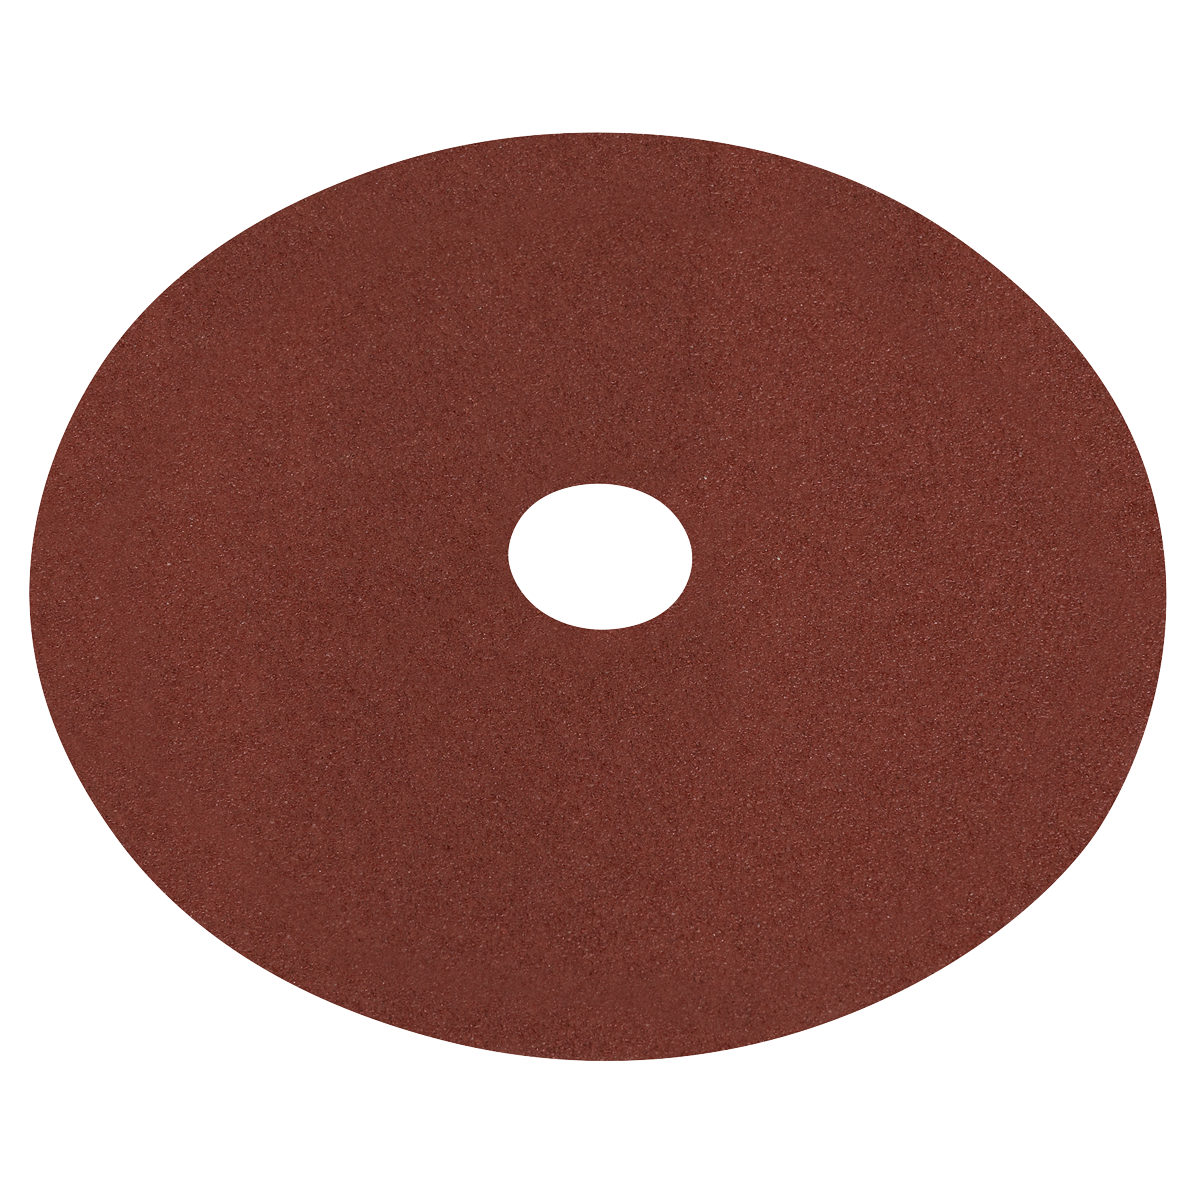 Fibre Backed Disc Ø100mm - 60Grit Pack of 25 - WSD460 - Farming Parts